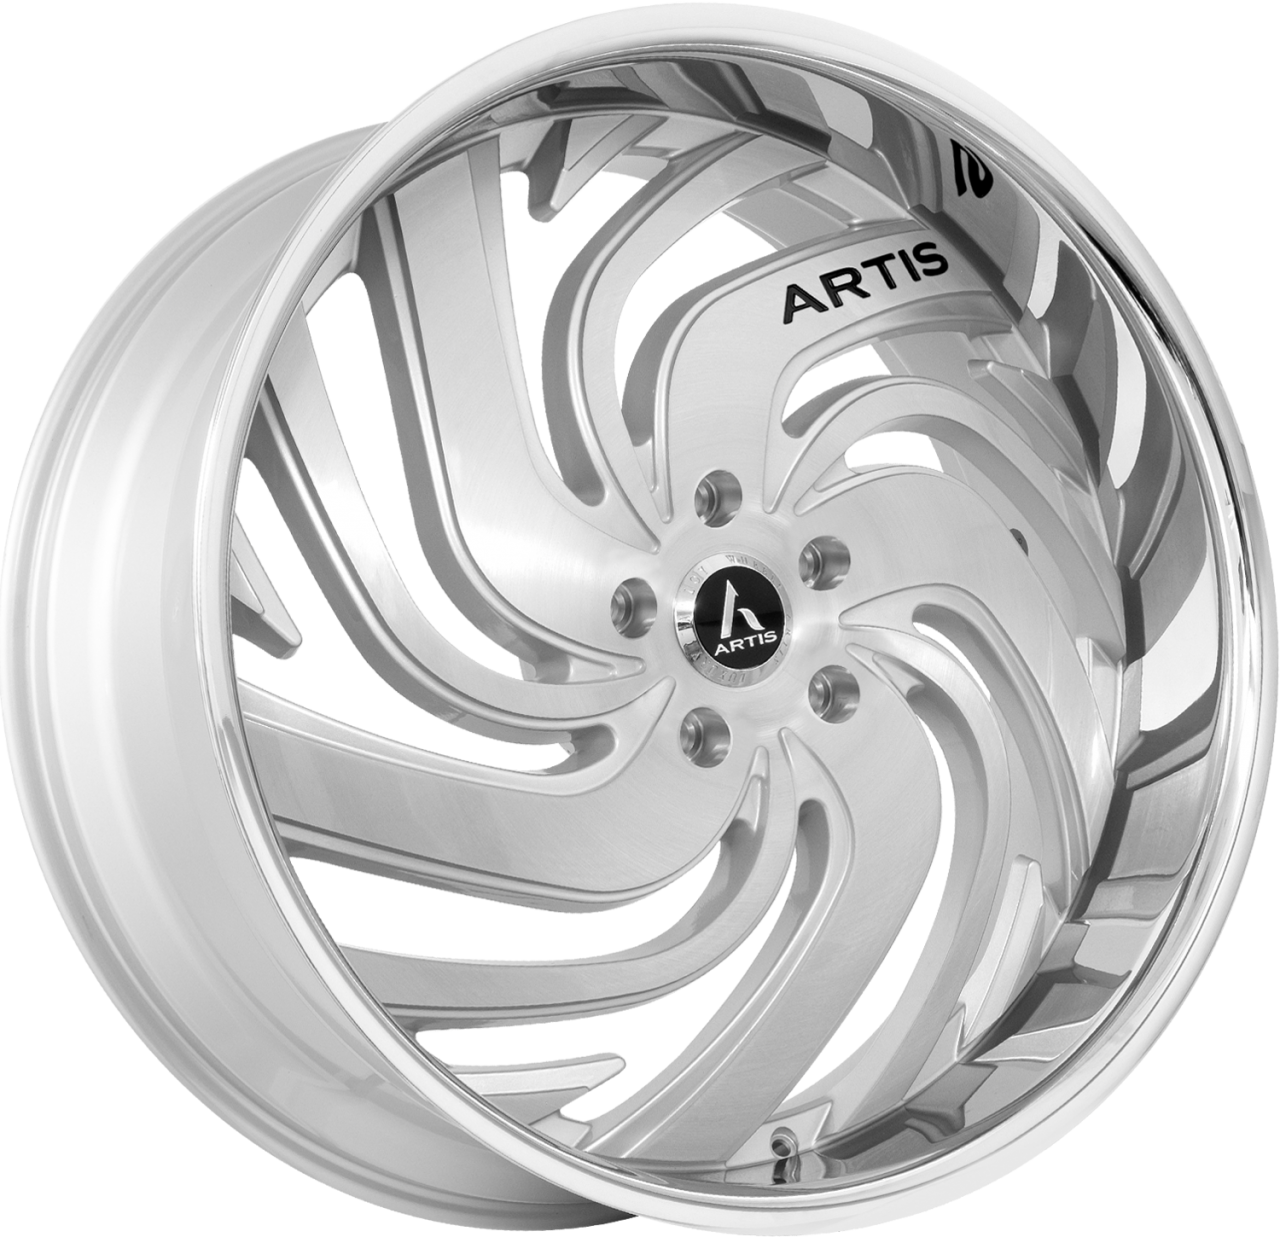 Artis Forged Fillmore wheel with Silver finish